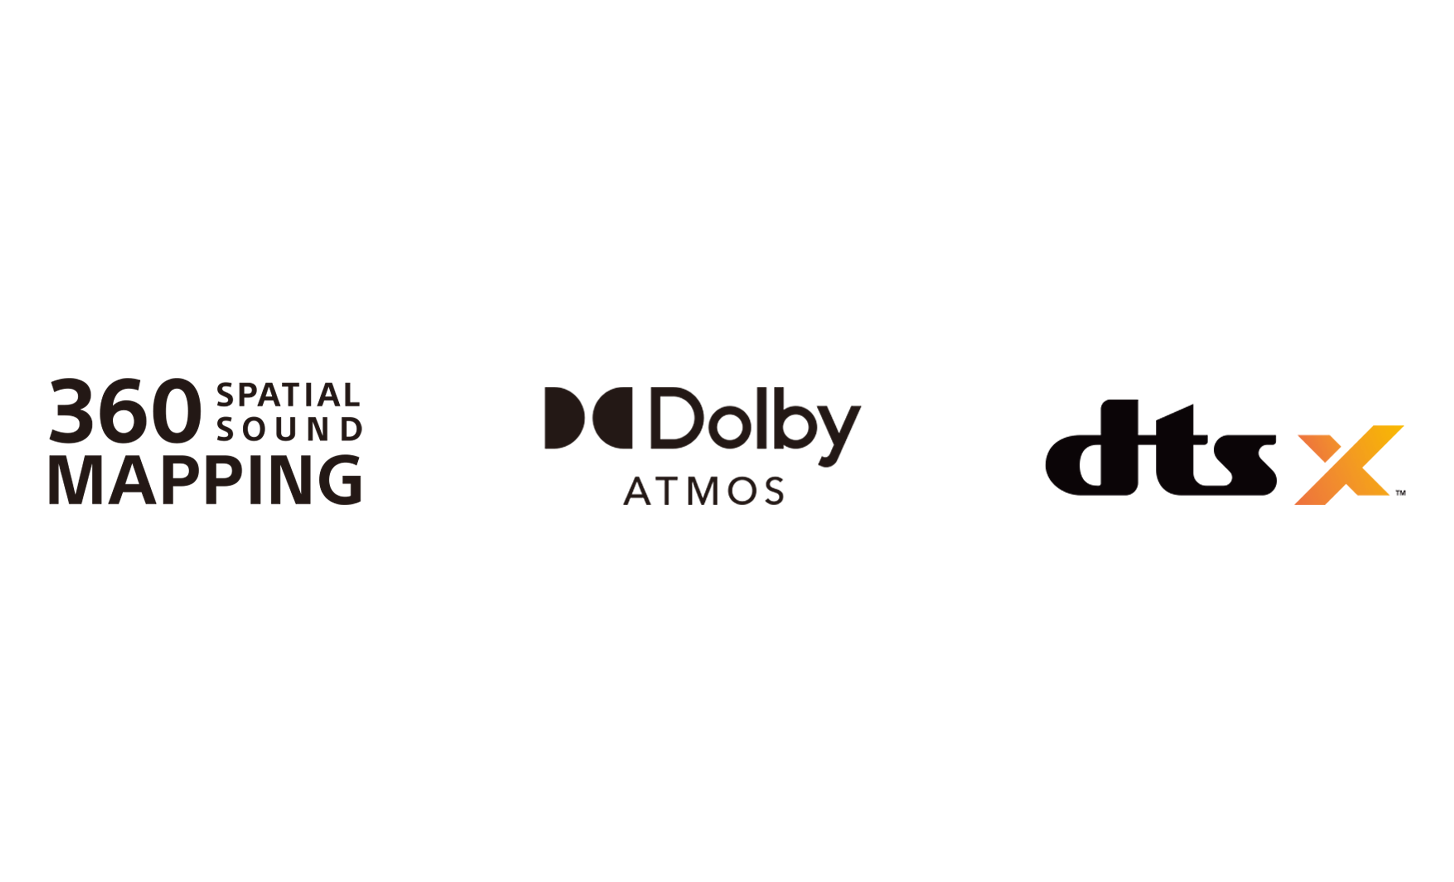 Logos 360 Spatial Sound Mapping, Dolby Atmos et dtsX